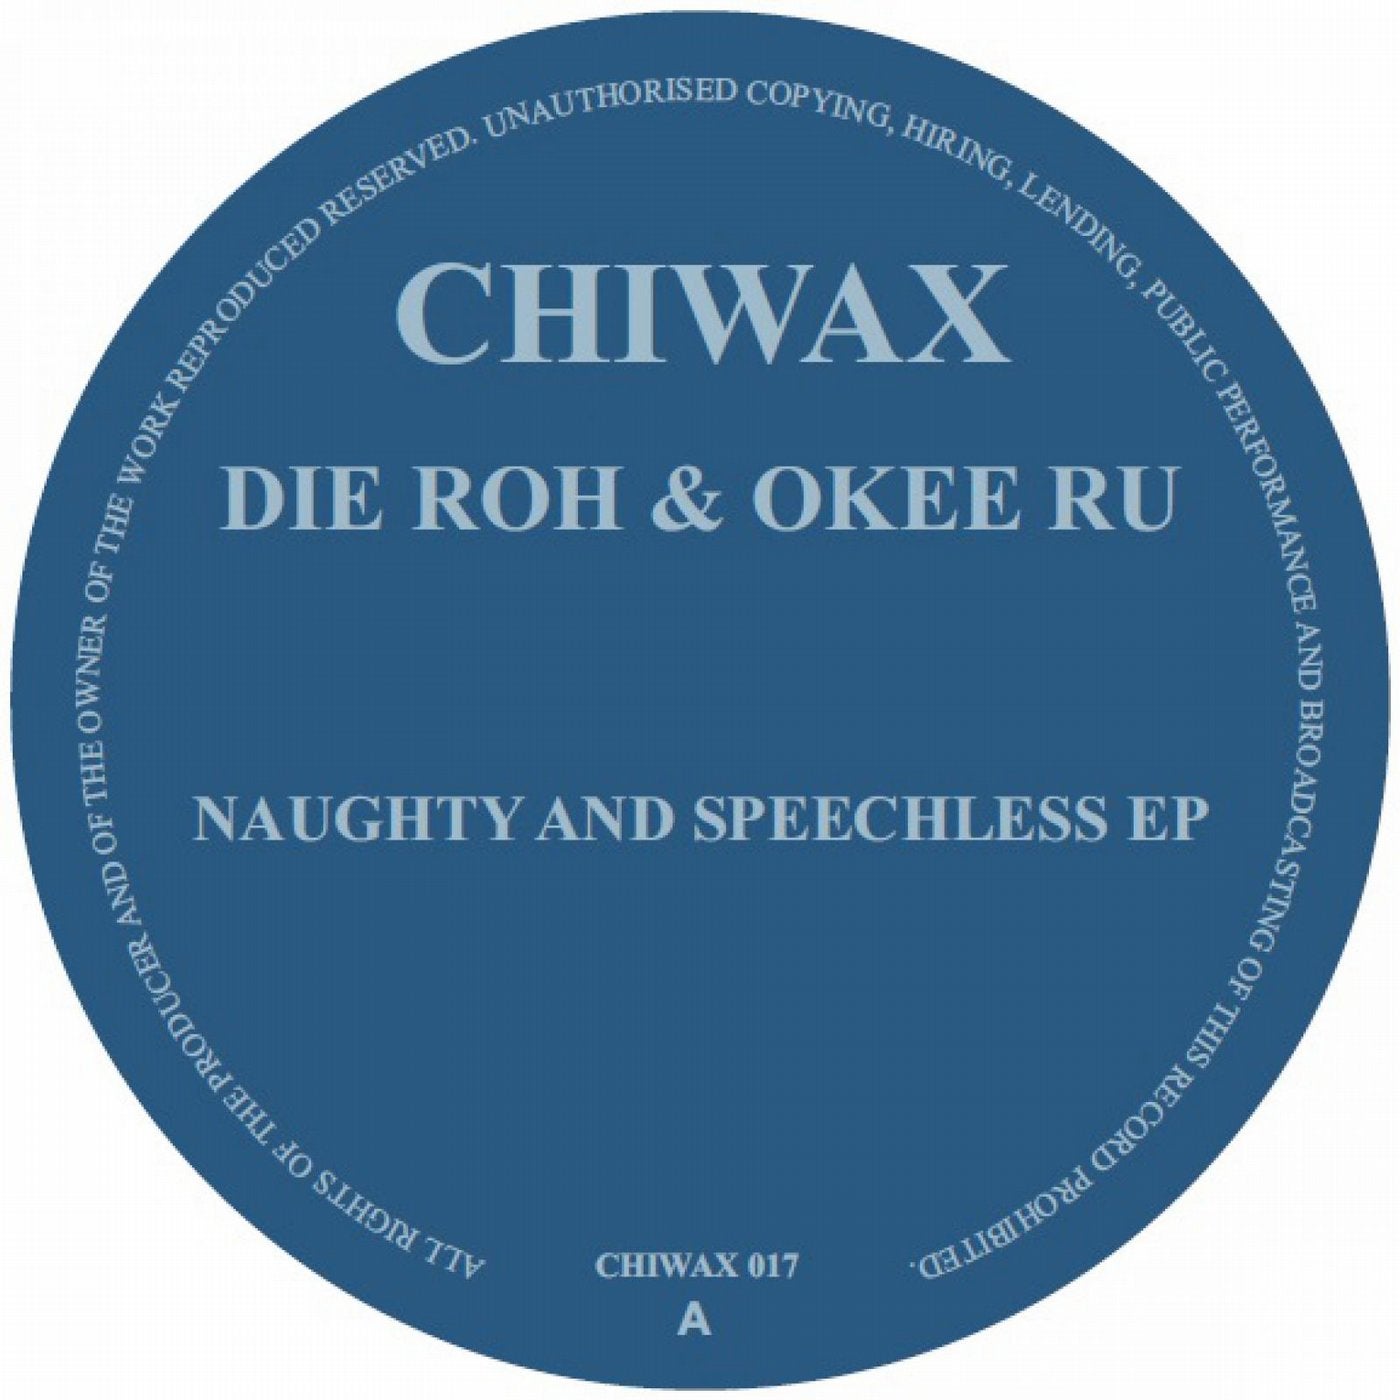 Naughty and Speechless EP